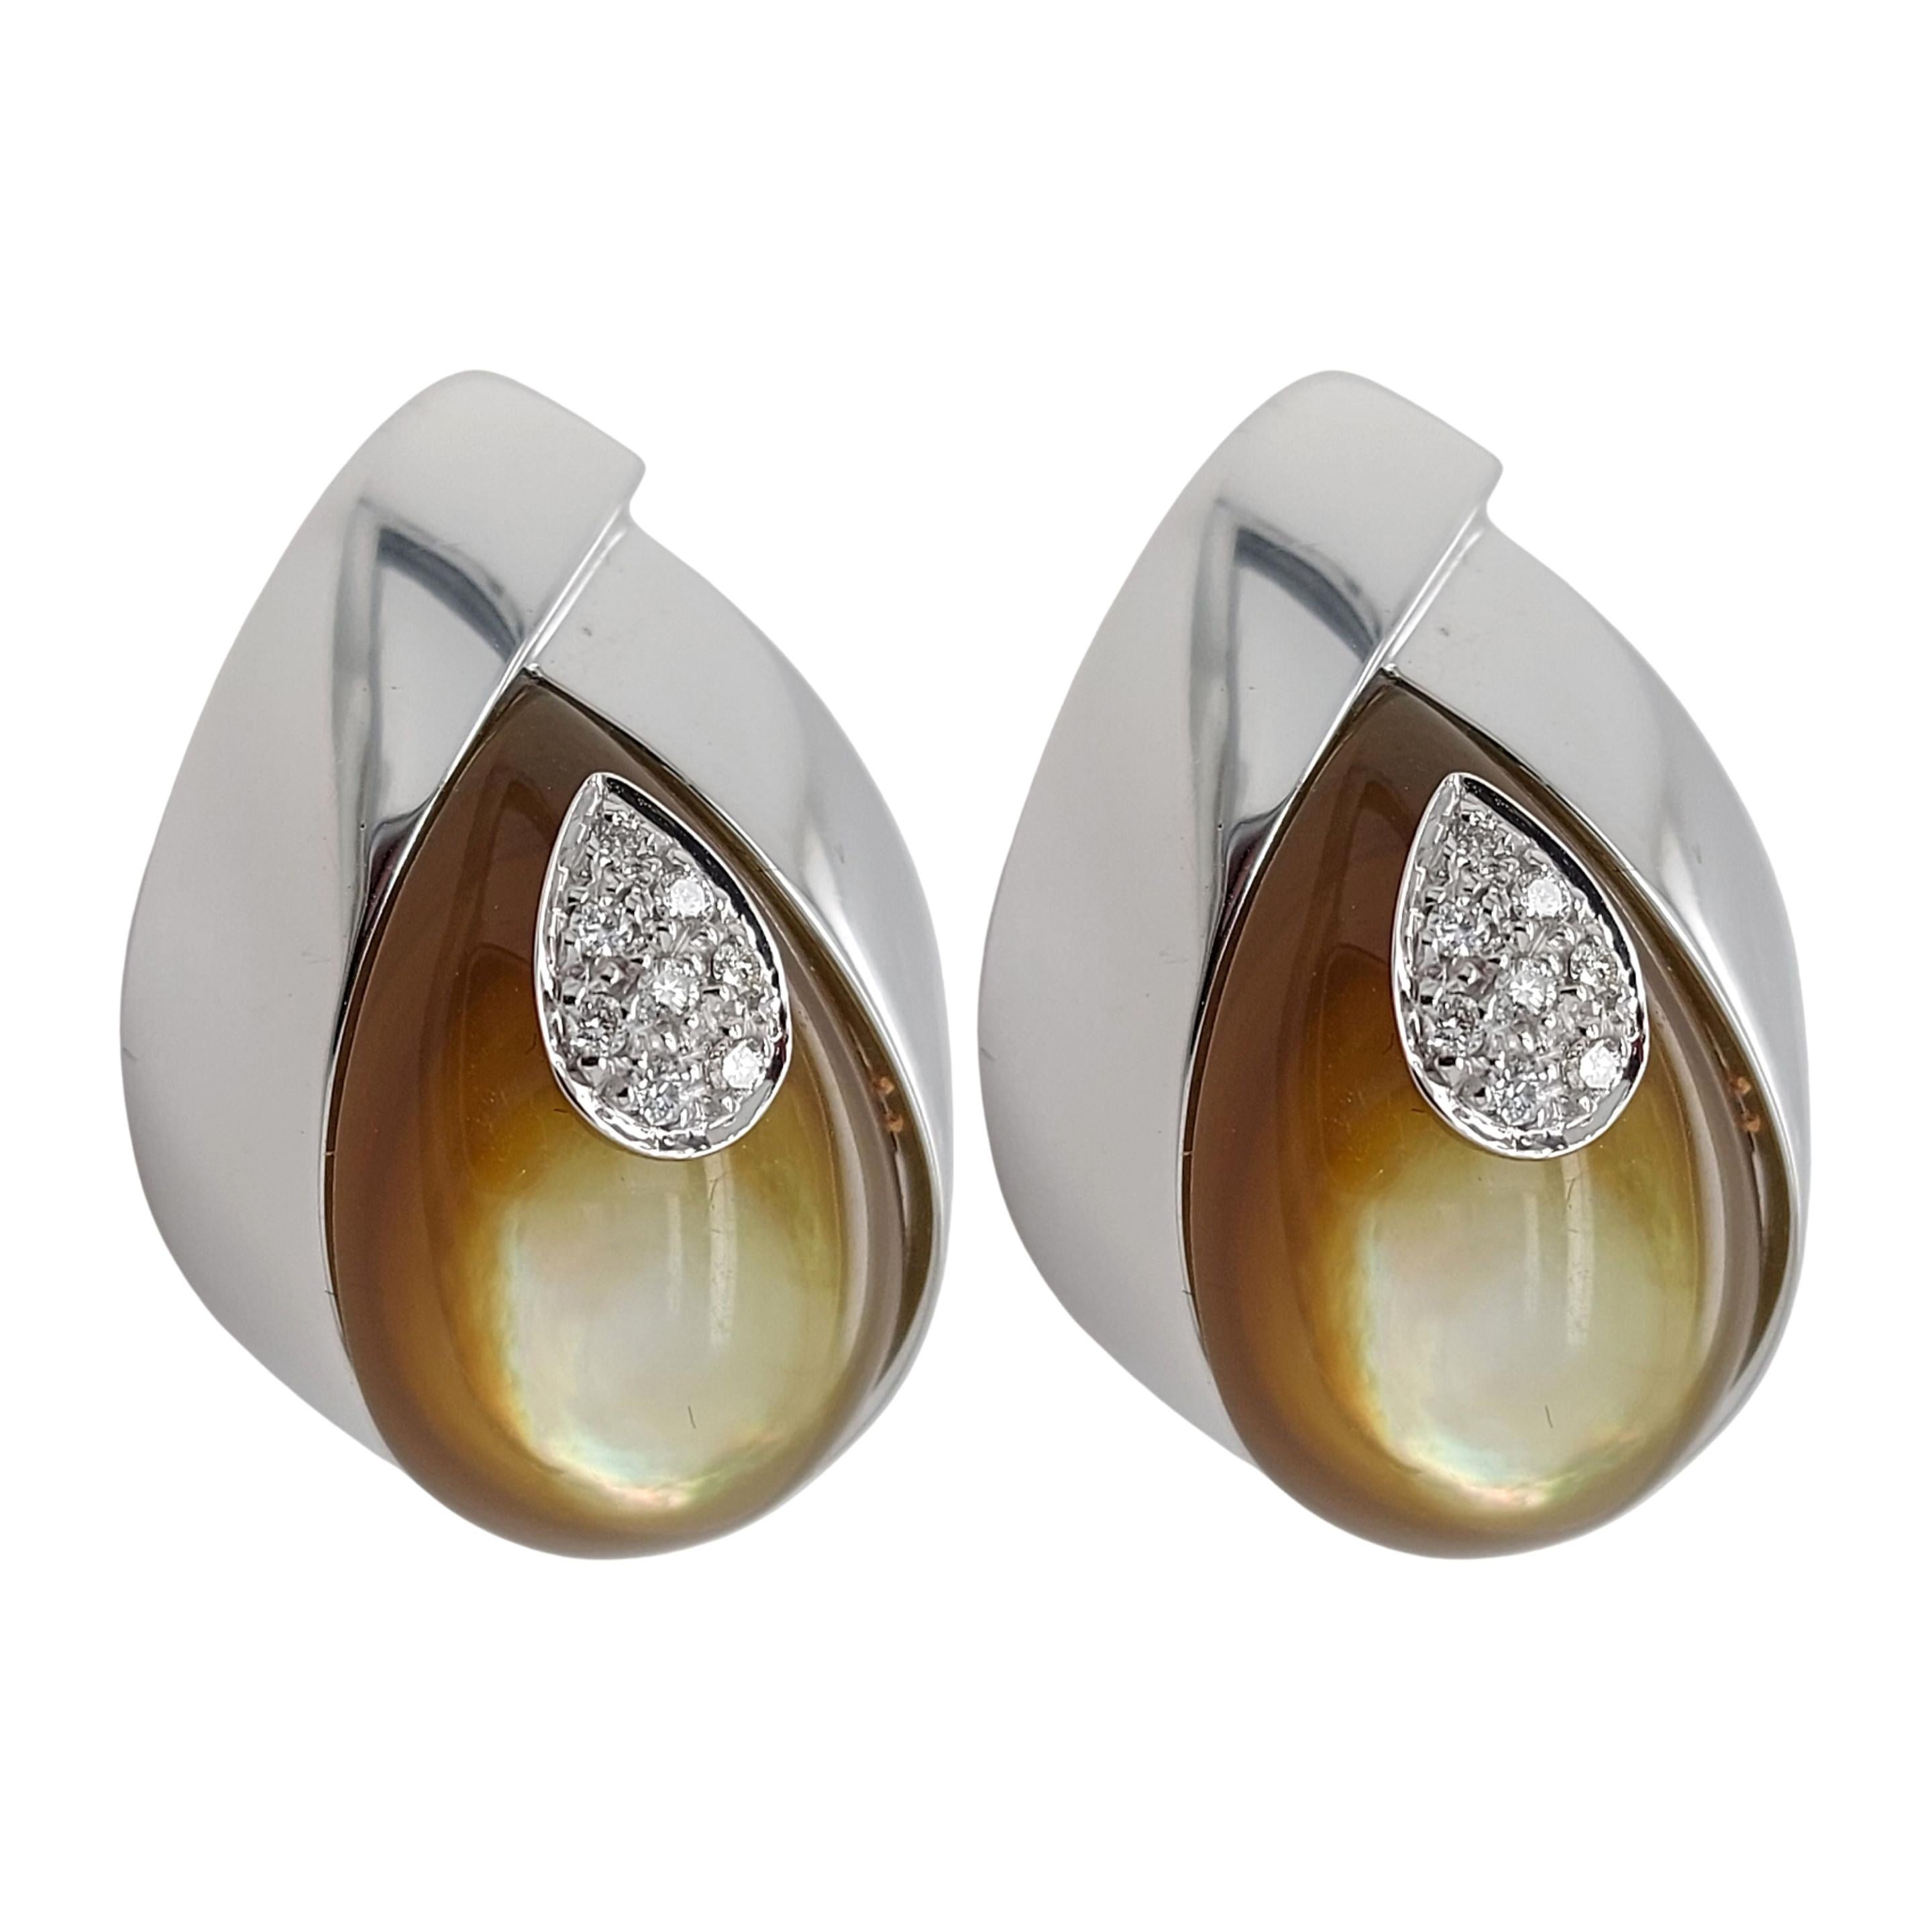 Talento Italiano Earrings in 18kt White Gold with 0.20 Carat Diamonds For Sale